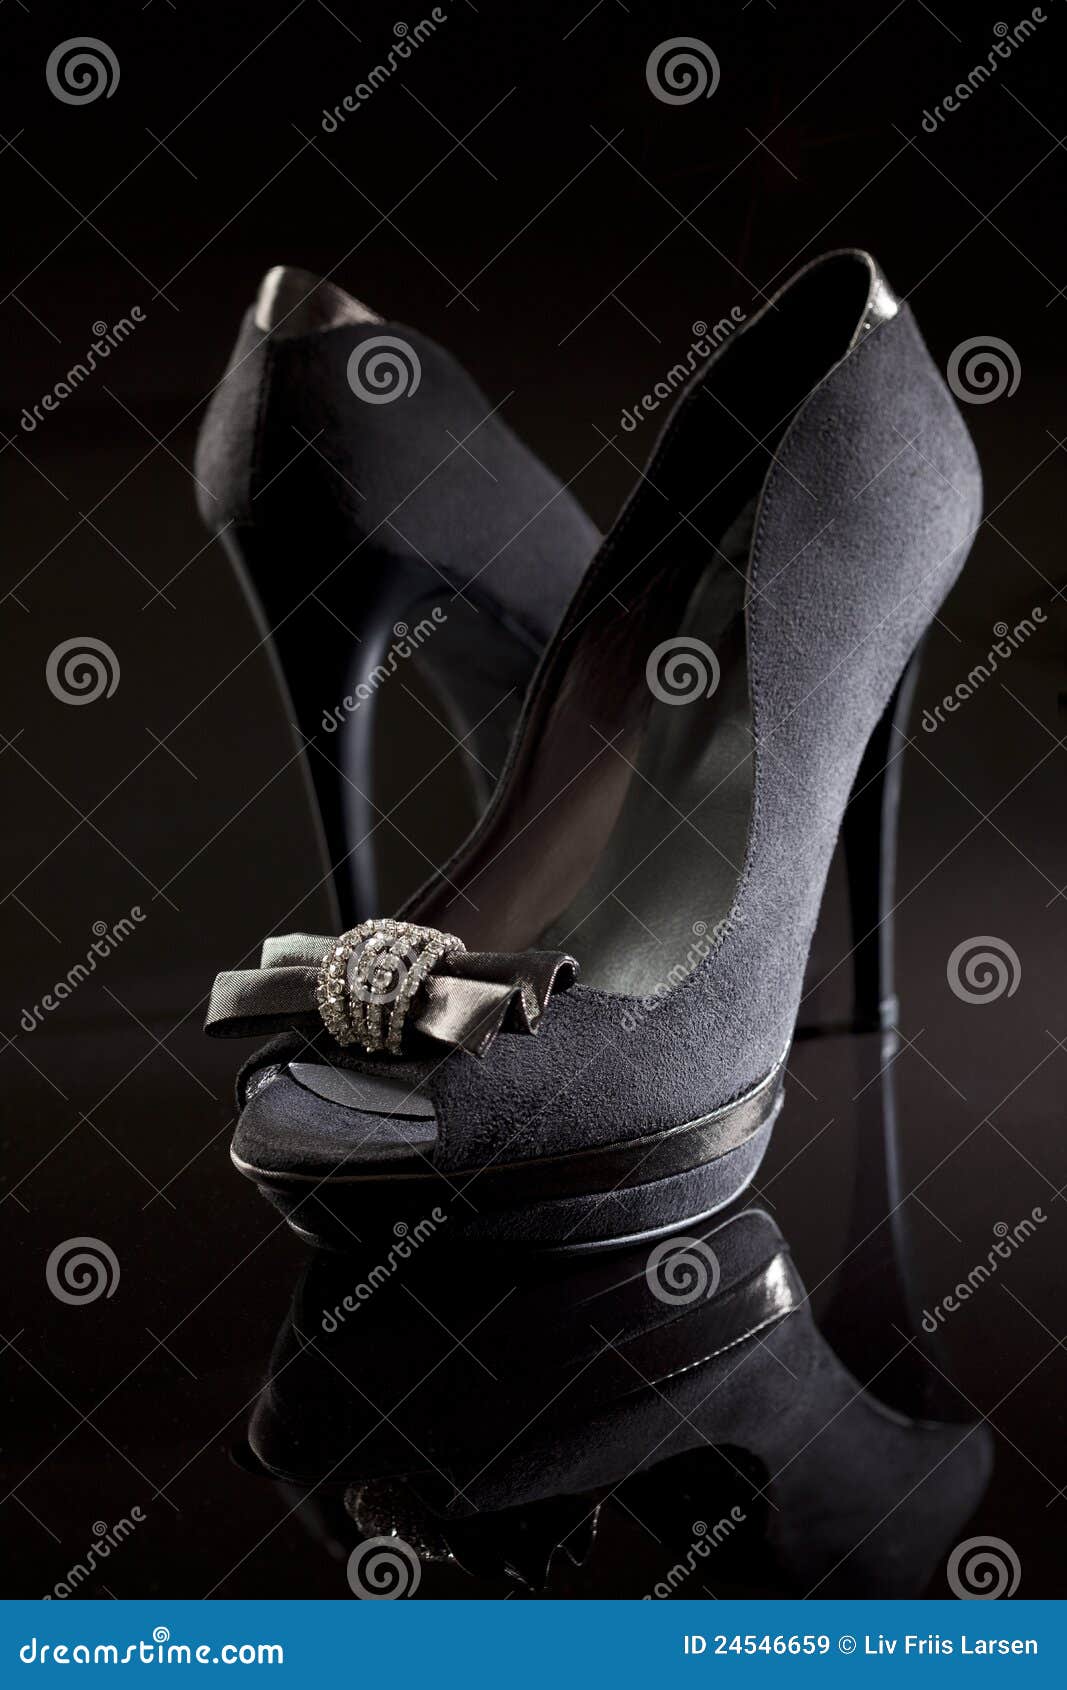 540+ Black High Heels Stock Videos and Royalty-Free Footage - iStock | Black  pumps, Shoes, Stiletto